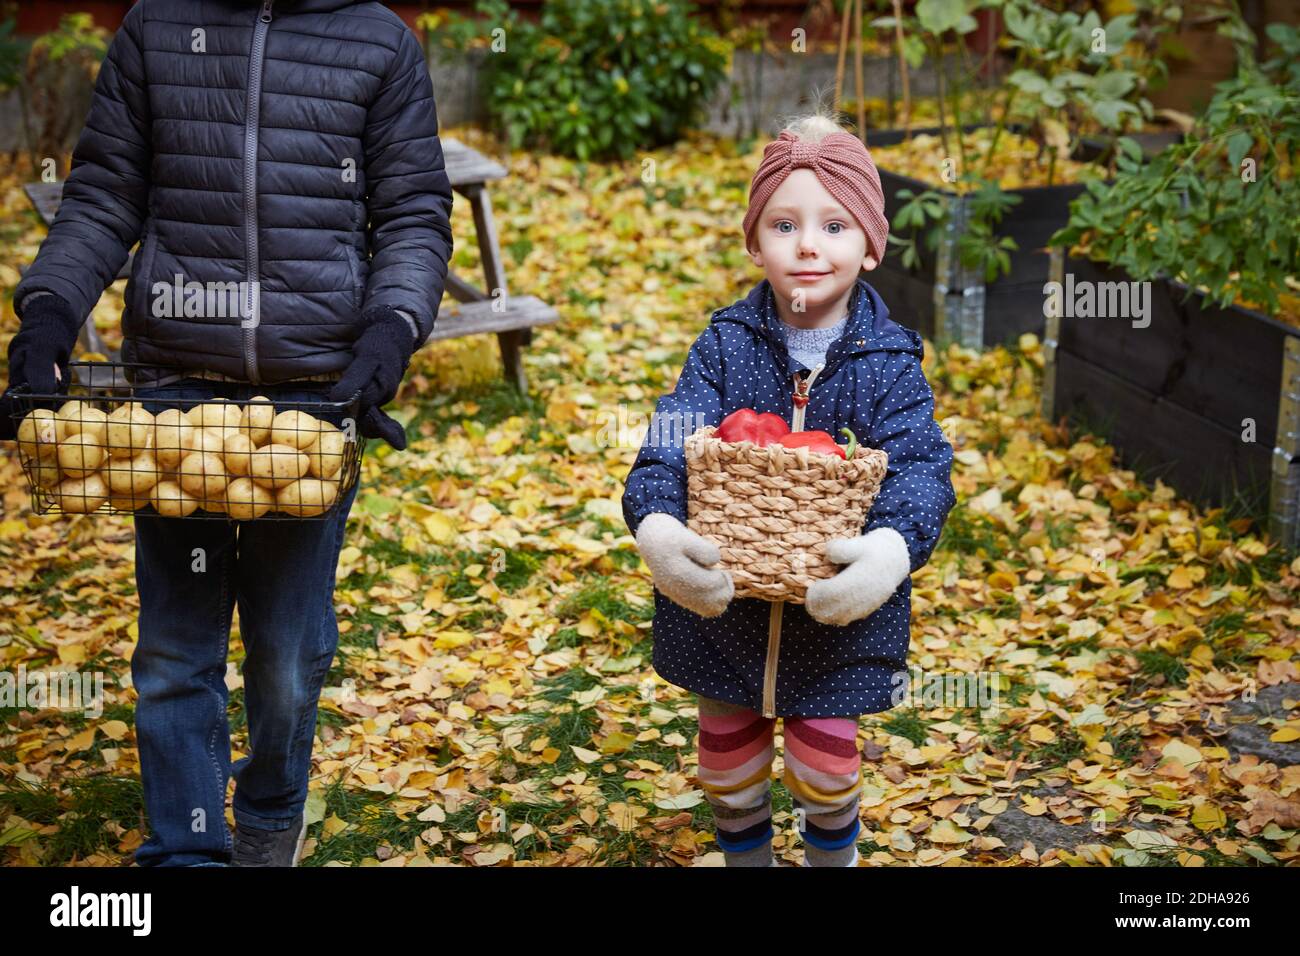 Portrait of smiling girl with vegetable basket while standing by male sibling in back yard Stock Photo